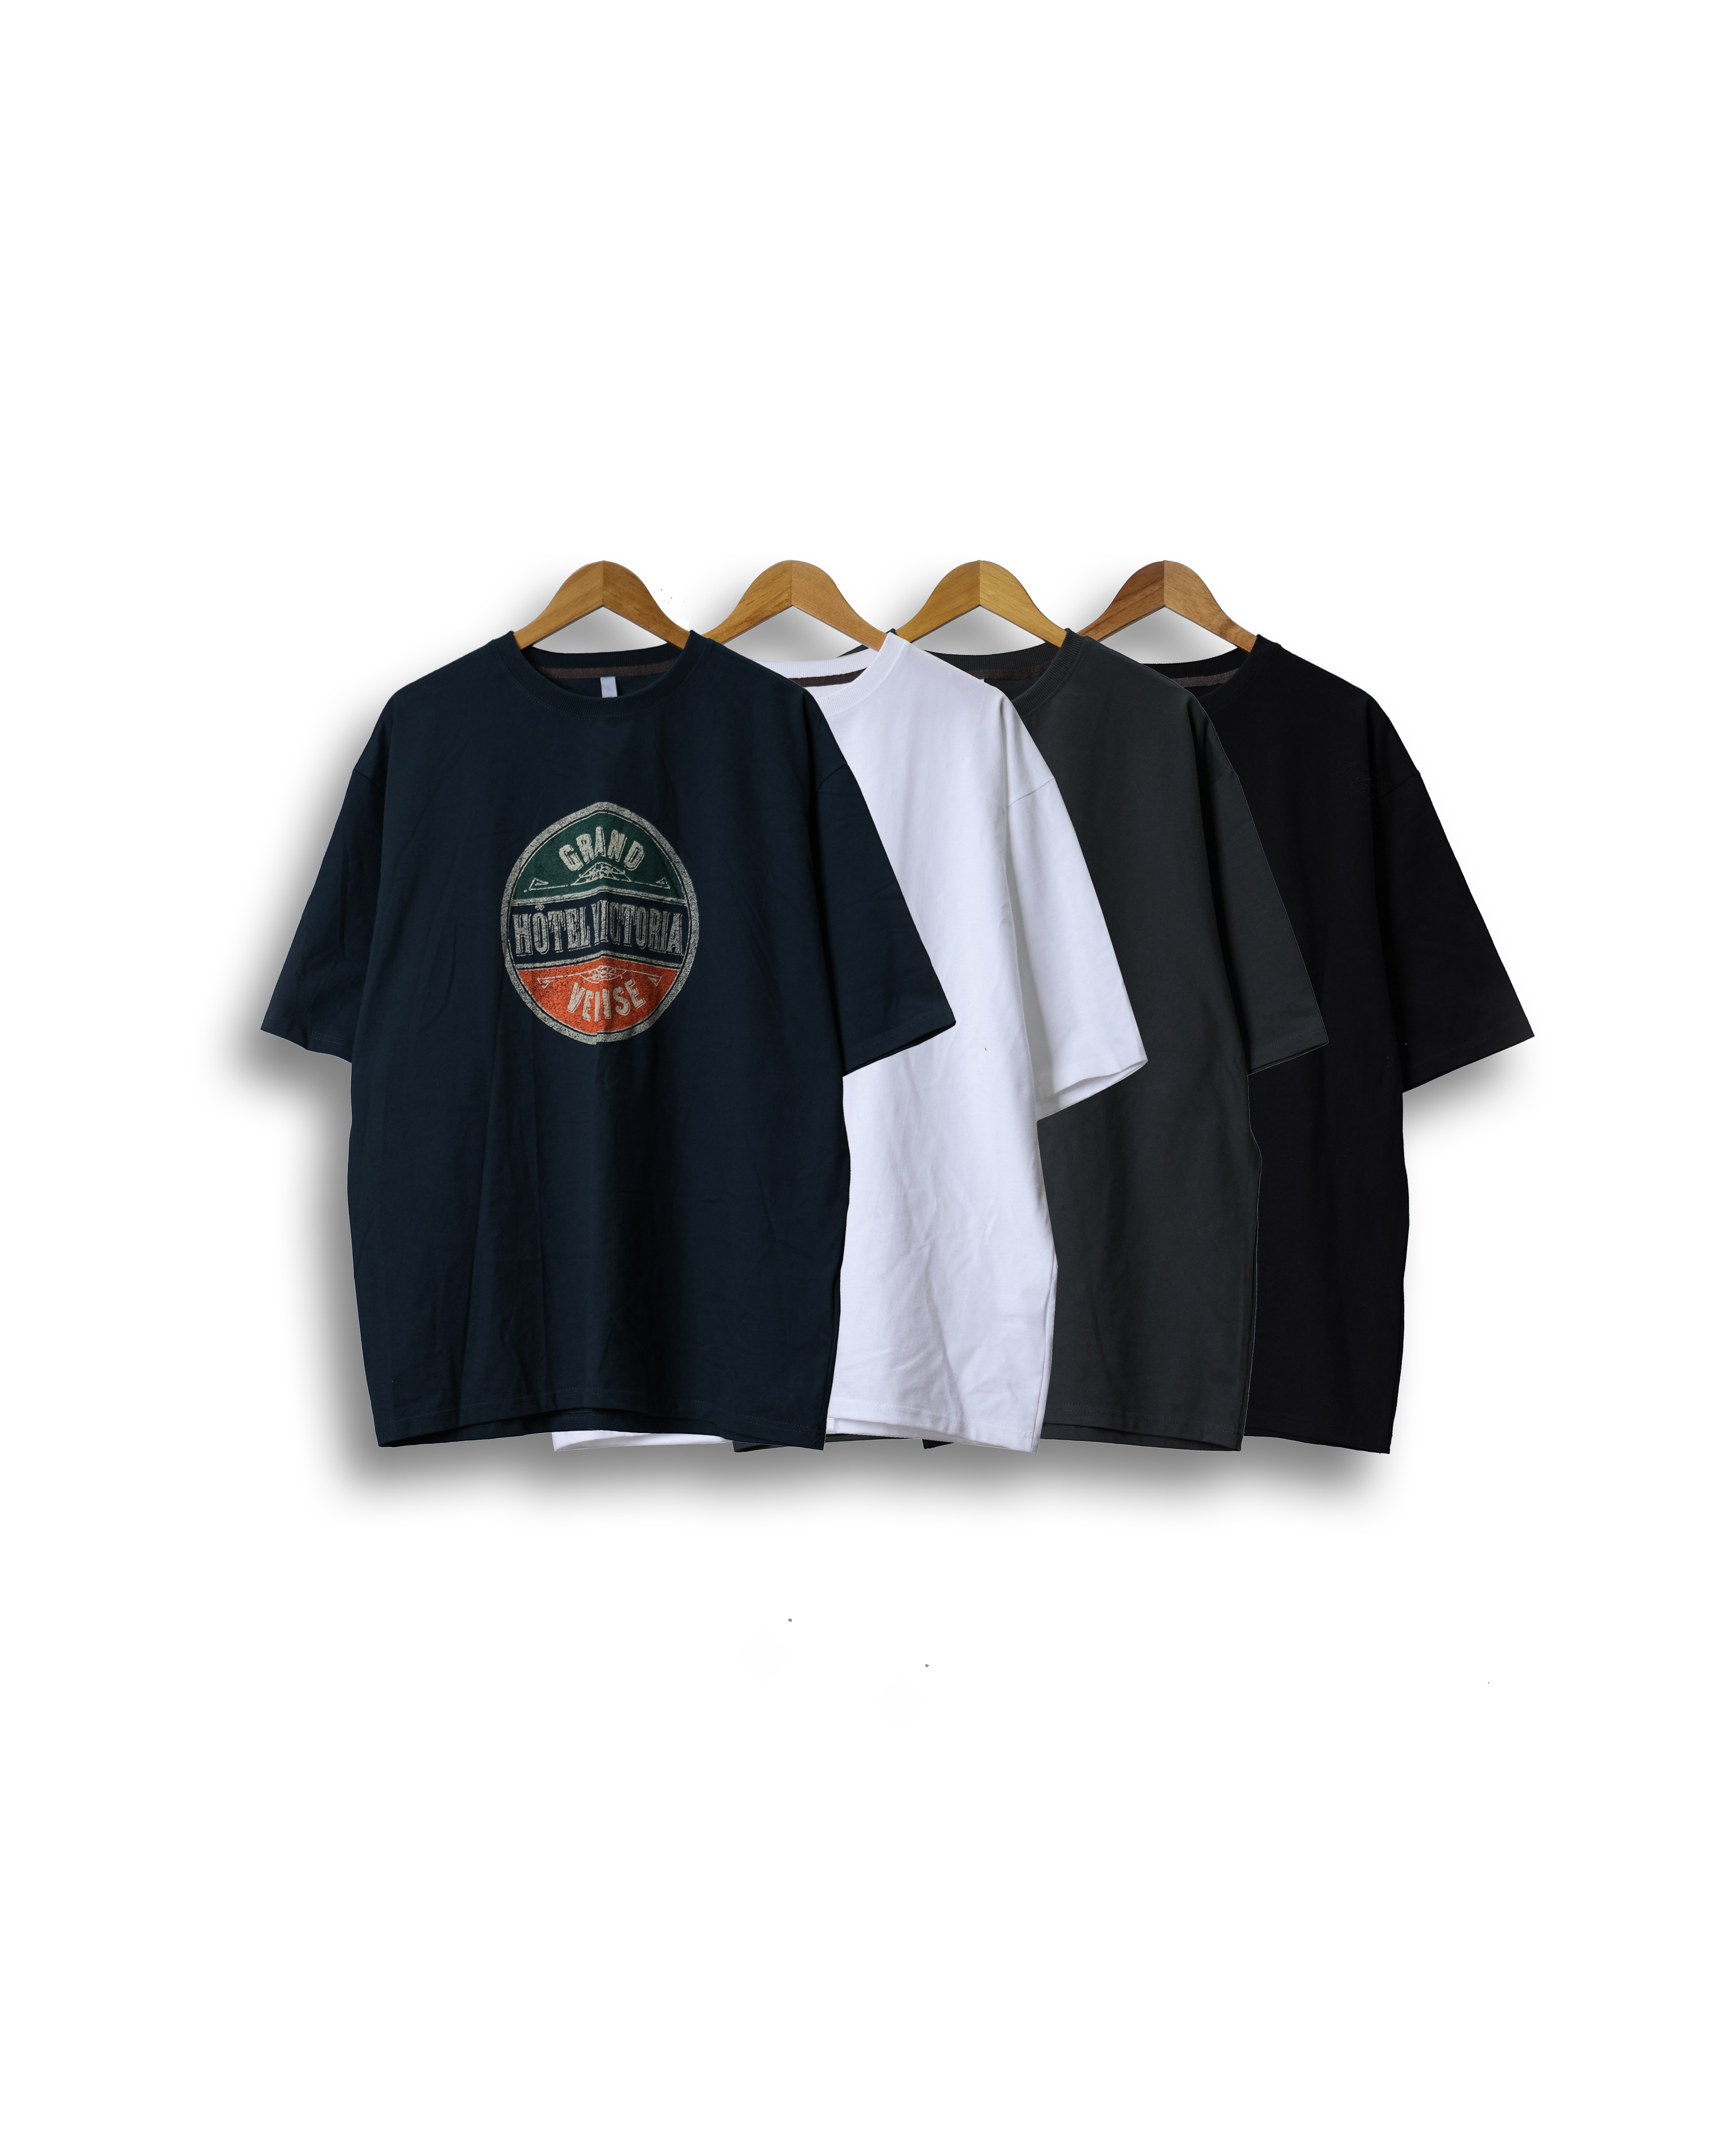 OTHER Victoria Hotel Vintage Over T Shirts (Black/Charcoal/Navy/White) - 8차 리오더 (5/10 배송예정)